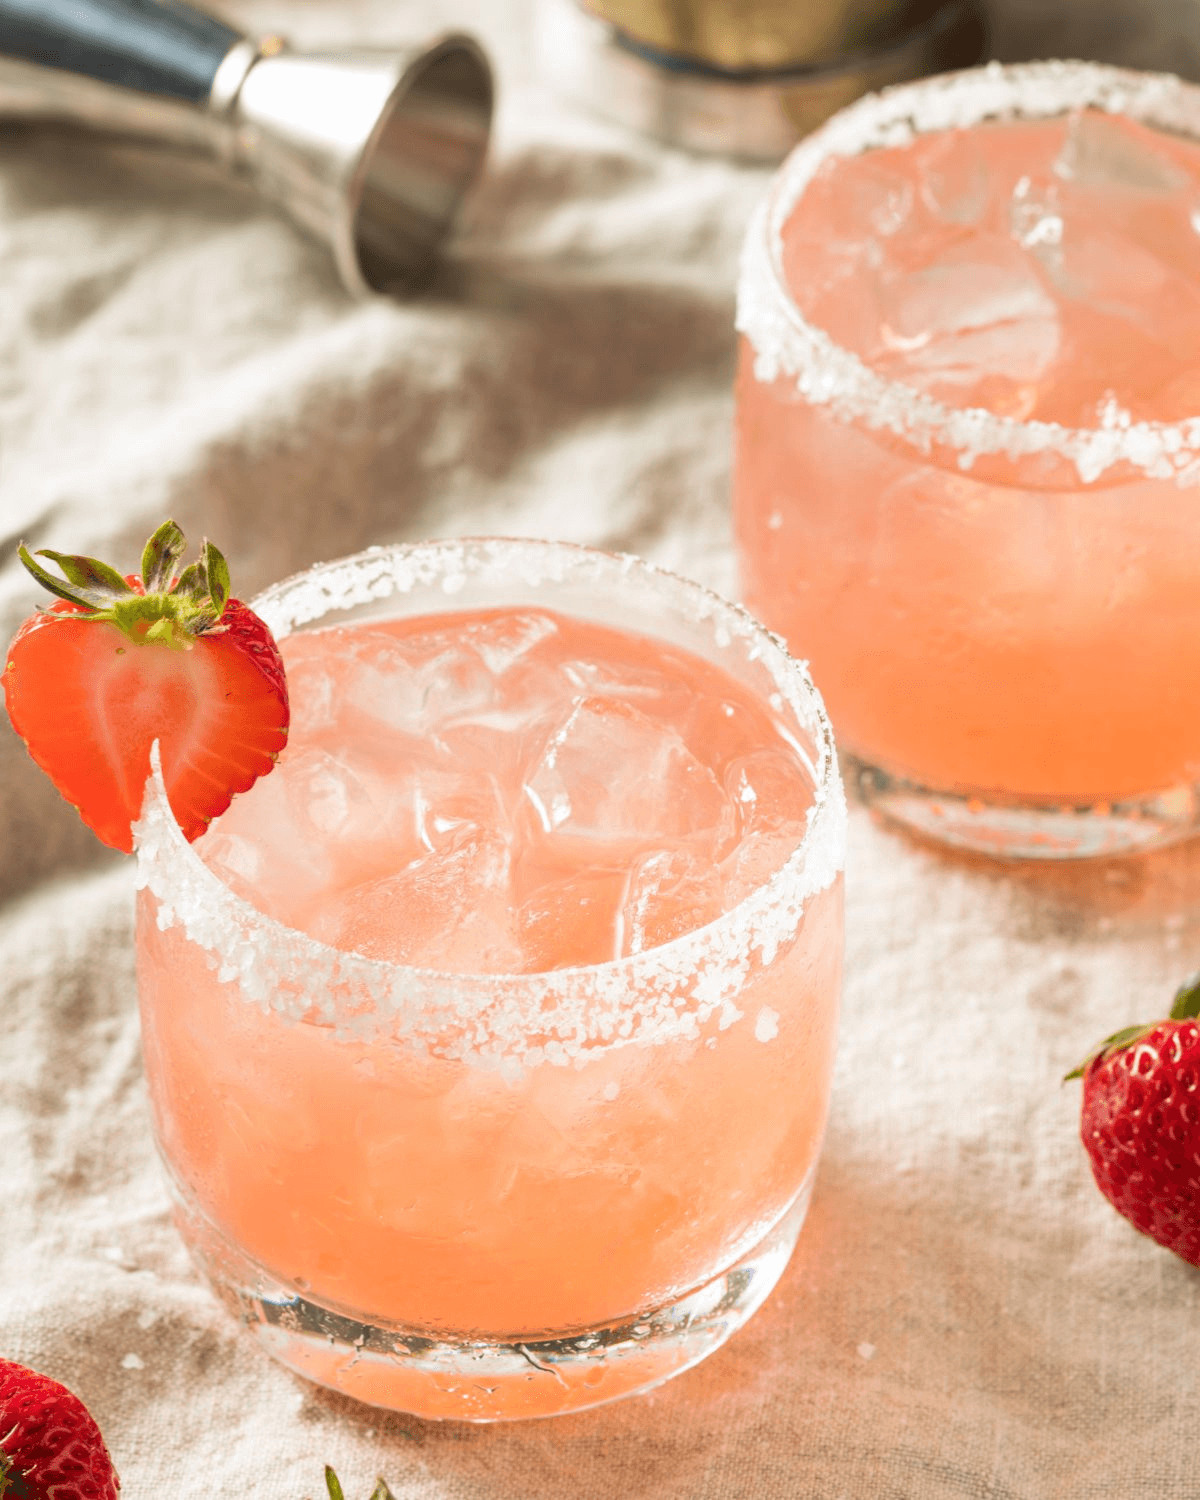 Two glasses of the strawberry margarita on the rocks.